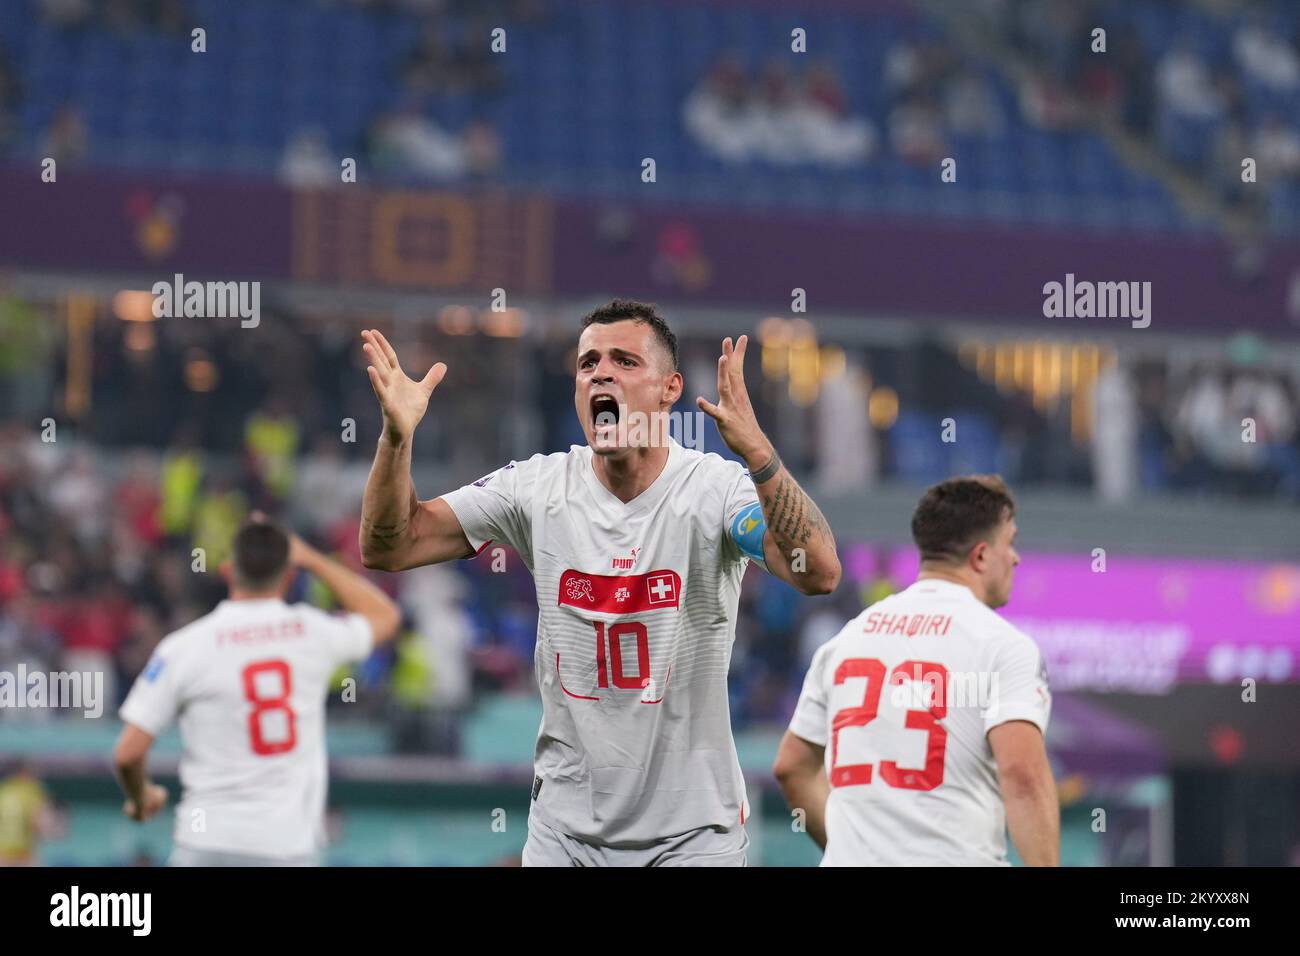 Doha, Qatar. 2nd Dec, 2022. Granit Xhaka of Switzerland reacts during the Group G match between Serbia and Switzerland at the 2022 FIFA World Cup at Stadium 974 in Doha, Qatar, Dec. 2, 2022. Credit: Meng Dingbo/Xinhua/Alamy Live News Stock Photo